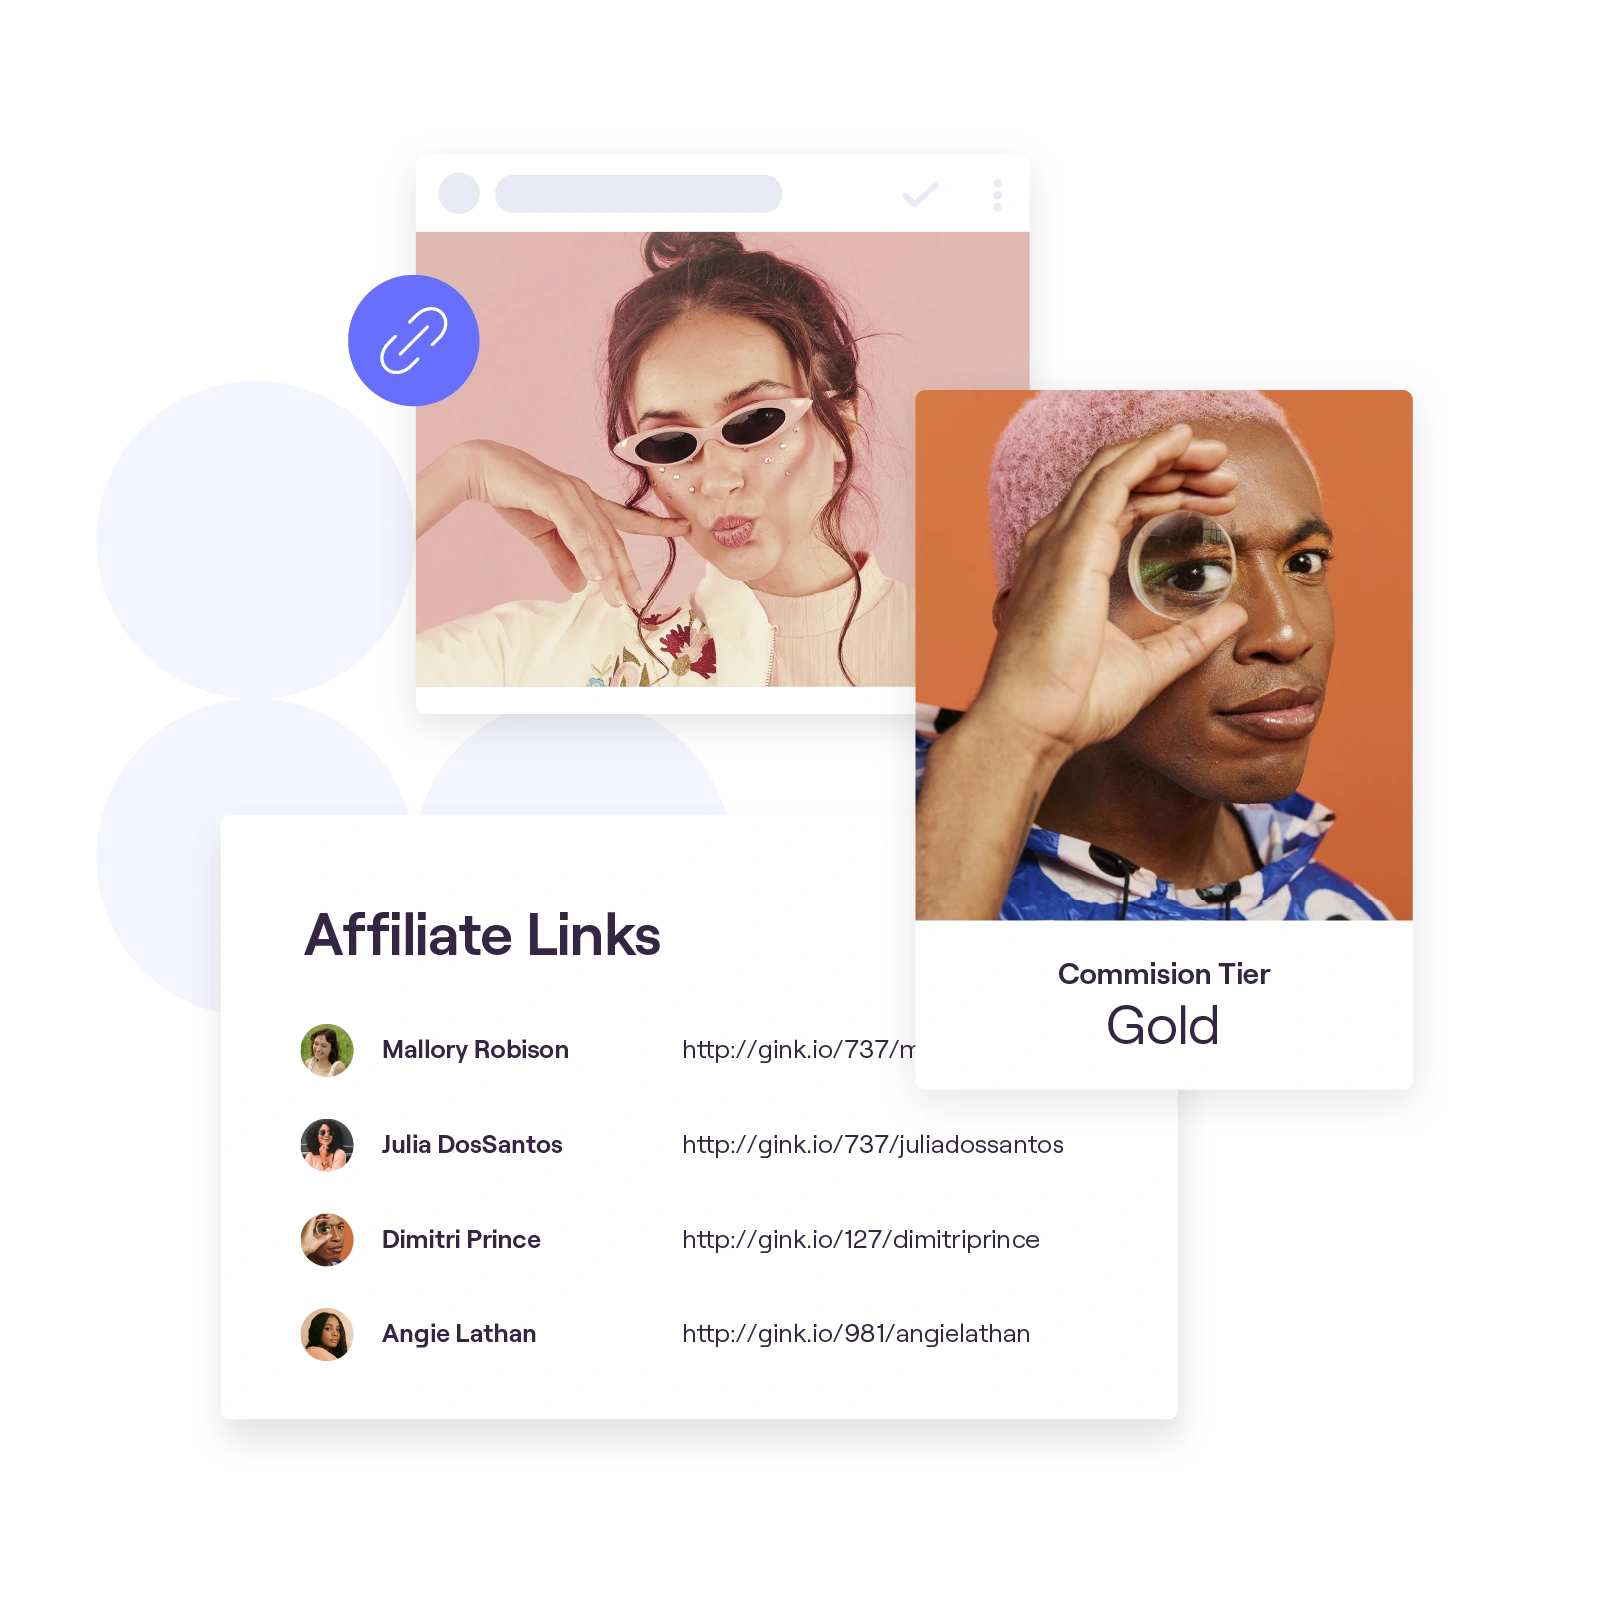 Stylized images of two content creators and a list of affiliate links